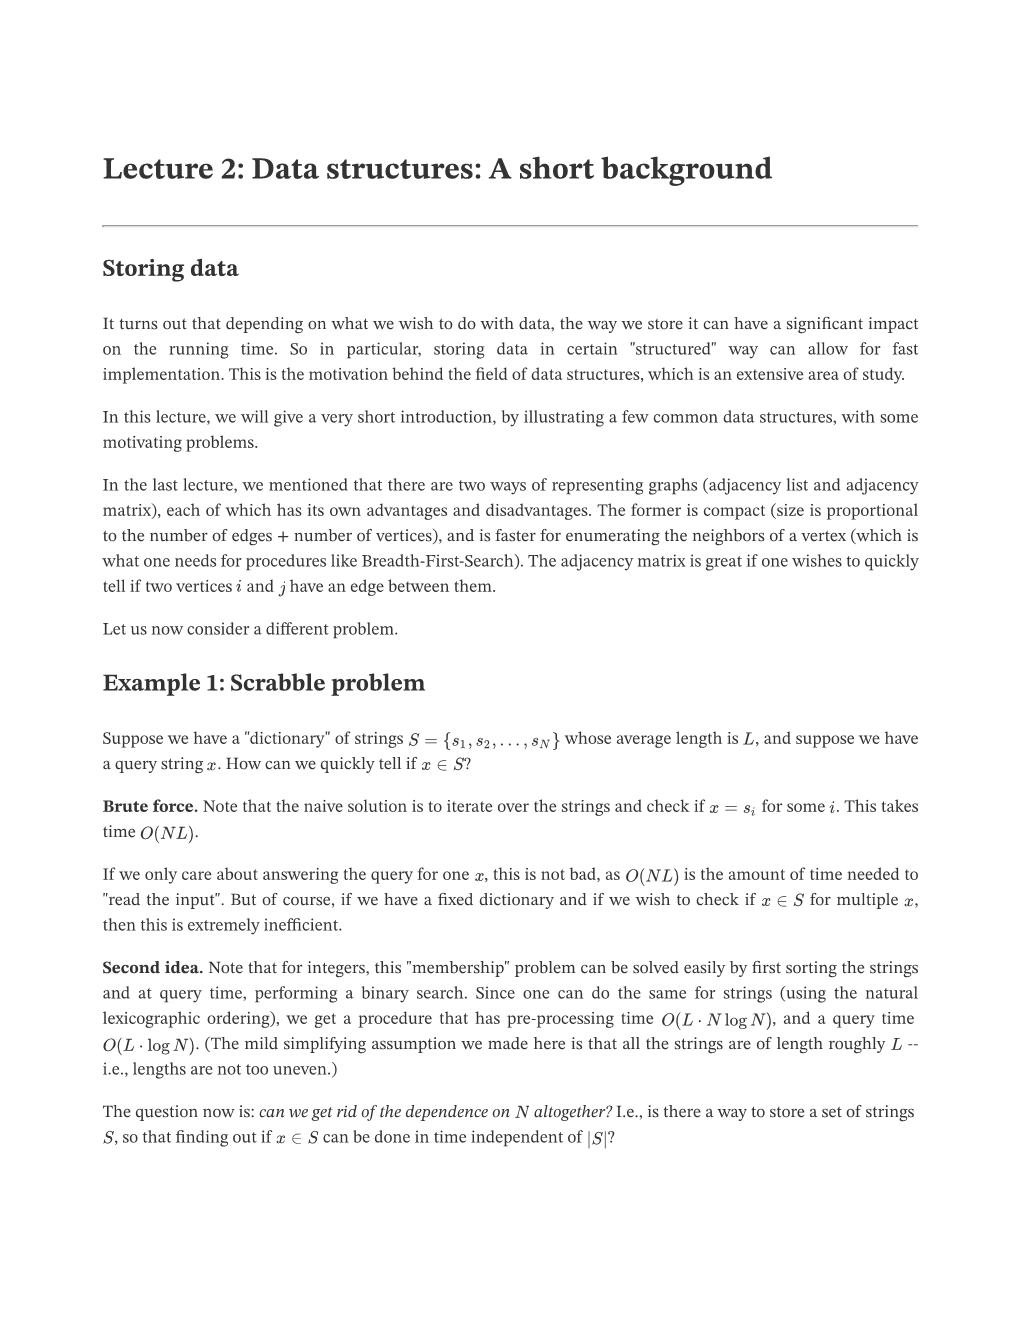 Lecture 2: Data Structures: a Short Background